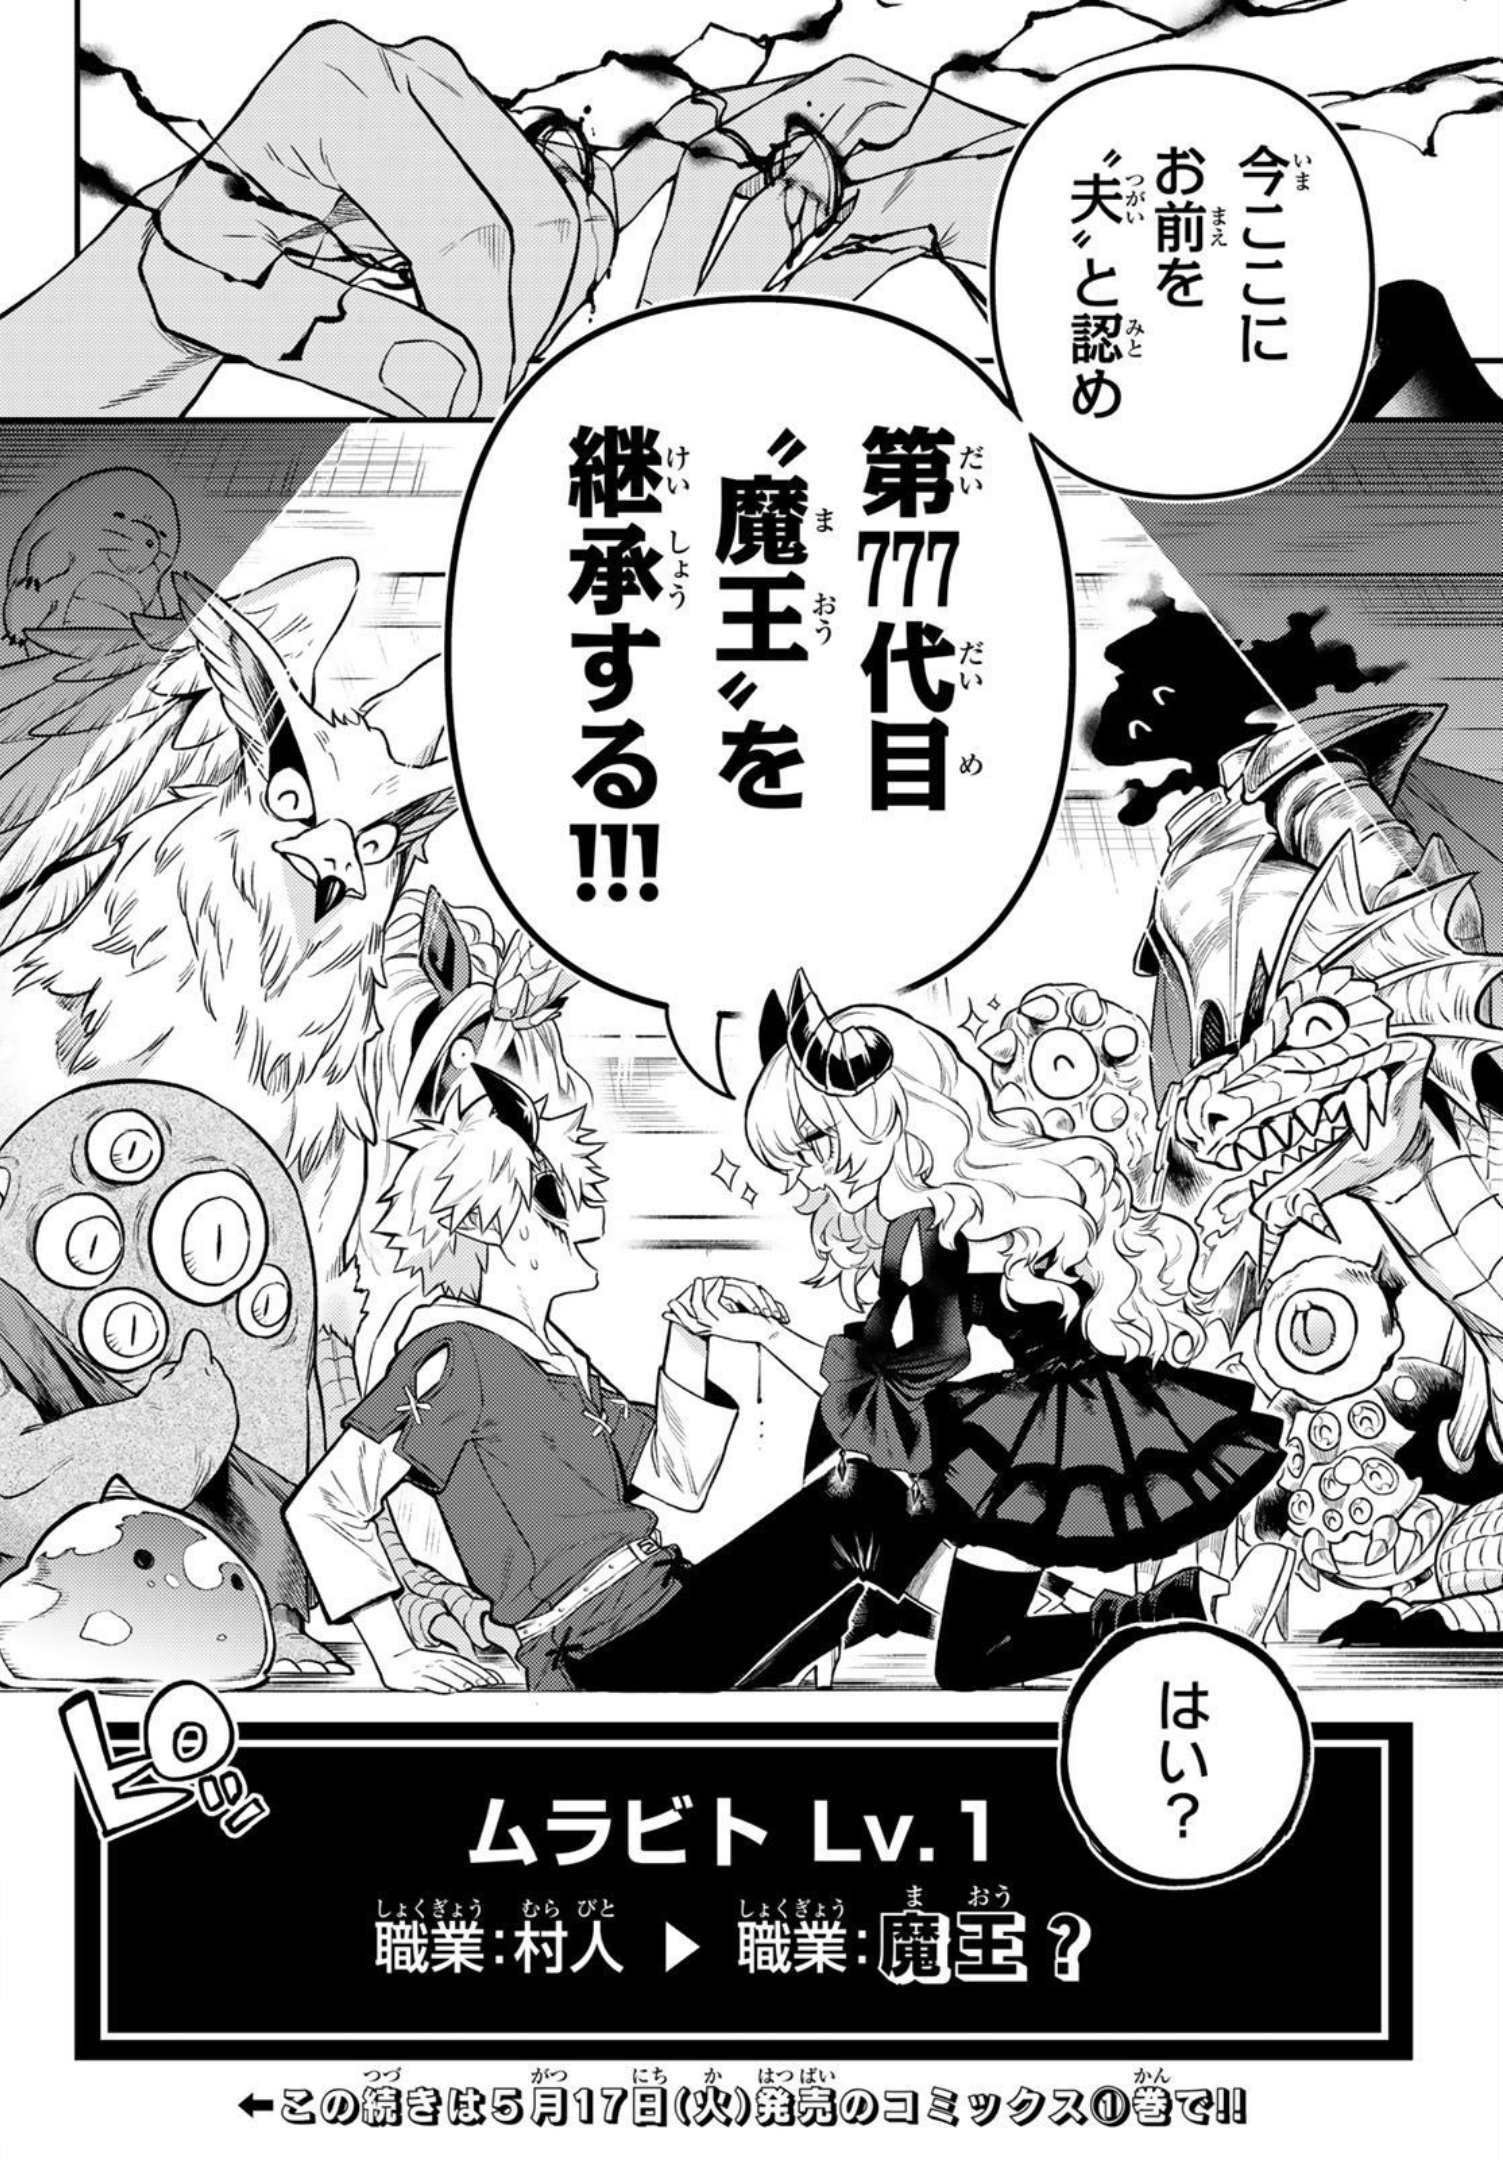 Weekly Shōnen Magazine - 週刊少年マガジン - Chapter 2022-24 - Page 647